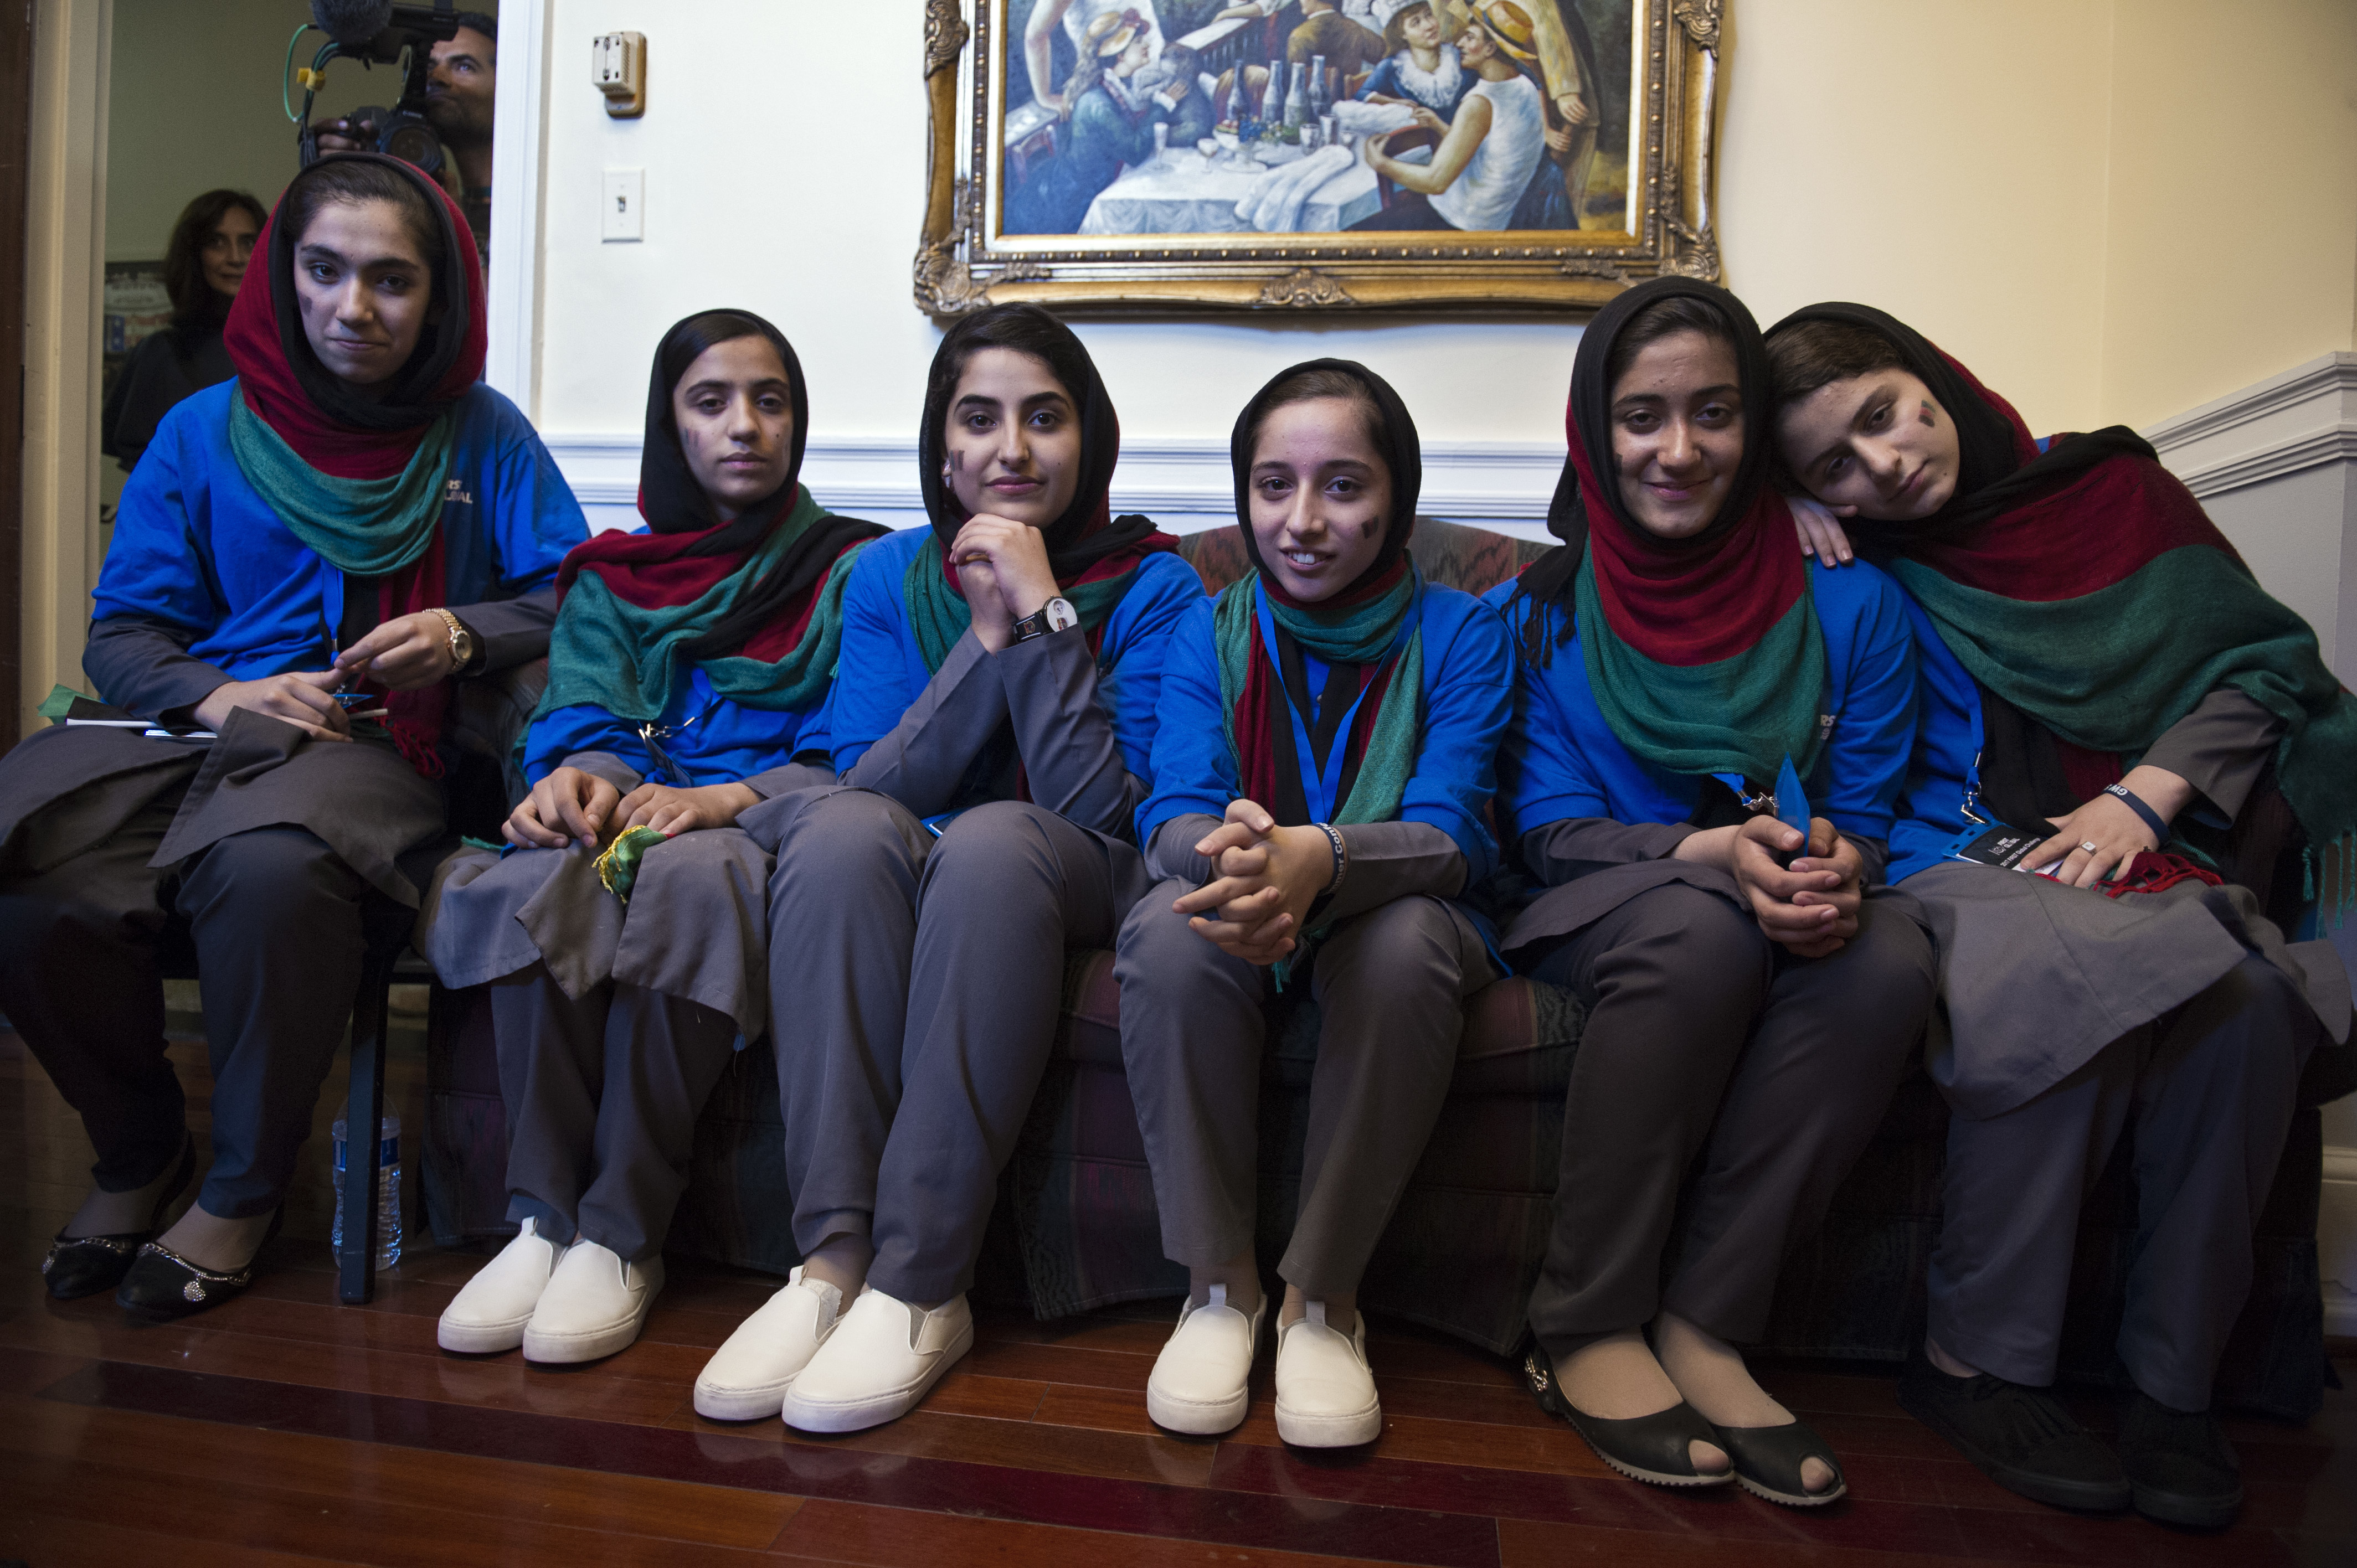 Afghanistan's FIRST Global Challenge team meet with reporters following the opening ceremony in Washington, Sunday, July 16, 2017. Twice rejected for U.S. visas, the all-girls robotics team arrived in Washington on Saturday and will compete against entrants from more than 150 countries in the three-day high school competition. It's the first annual robotics competition designed to encourage youths to pursue careers in math and science. (AP Photo/Cliff Owen)